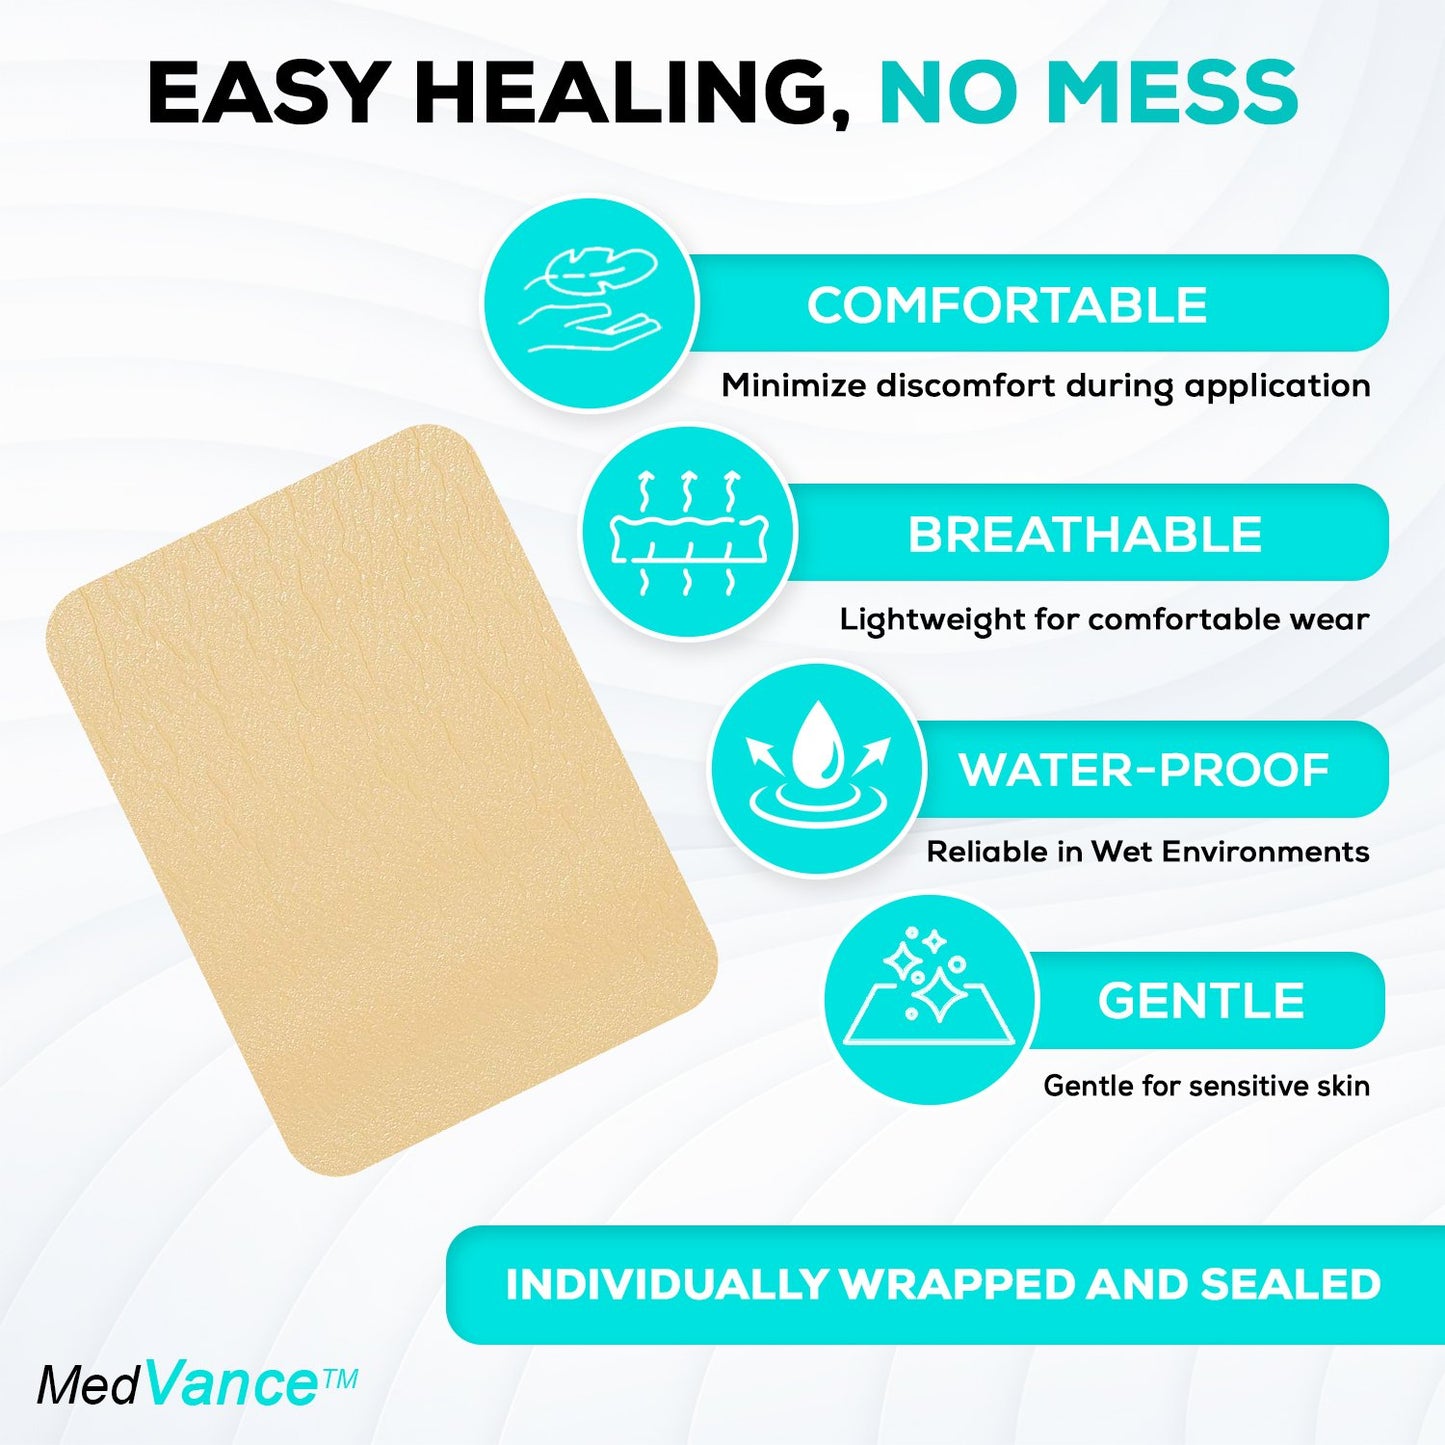 MedVance Silicone Non-Bordered Adhesive Wound Dressing, 6"x8", Box of 5